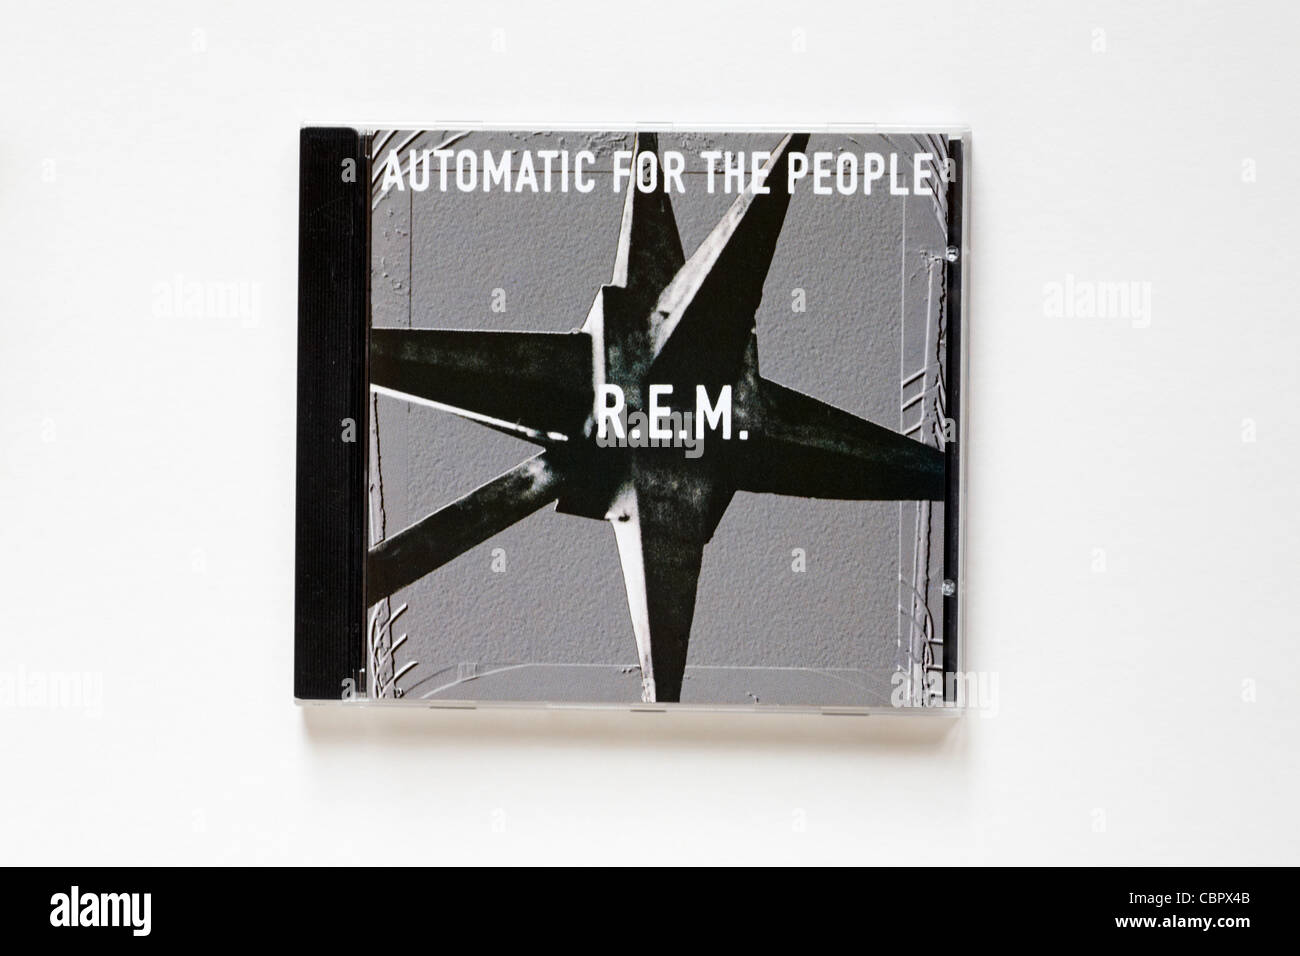 R.E.M. REM CD Automatic for the People CD isolated on white background  Stock Photo - Alamy